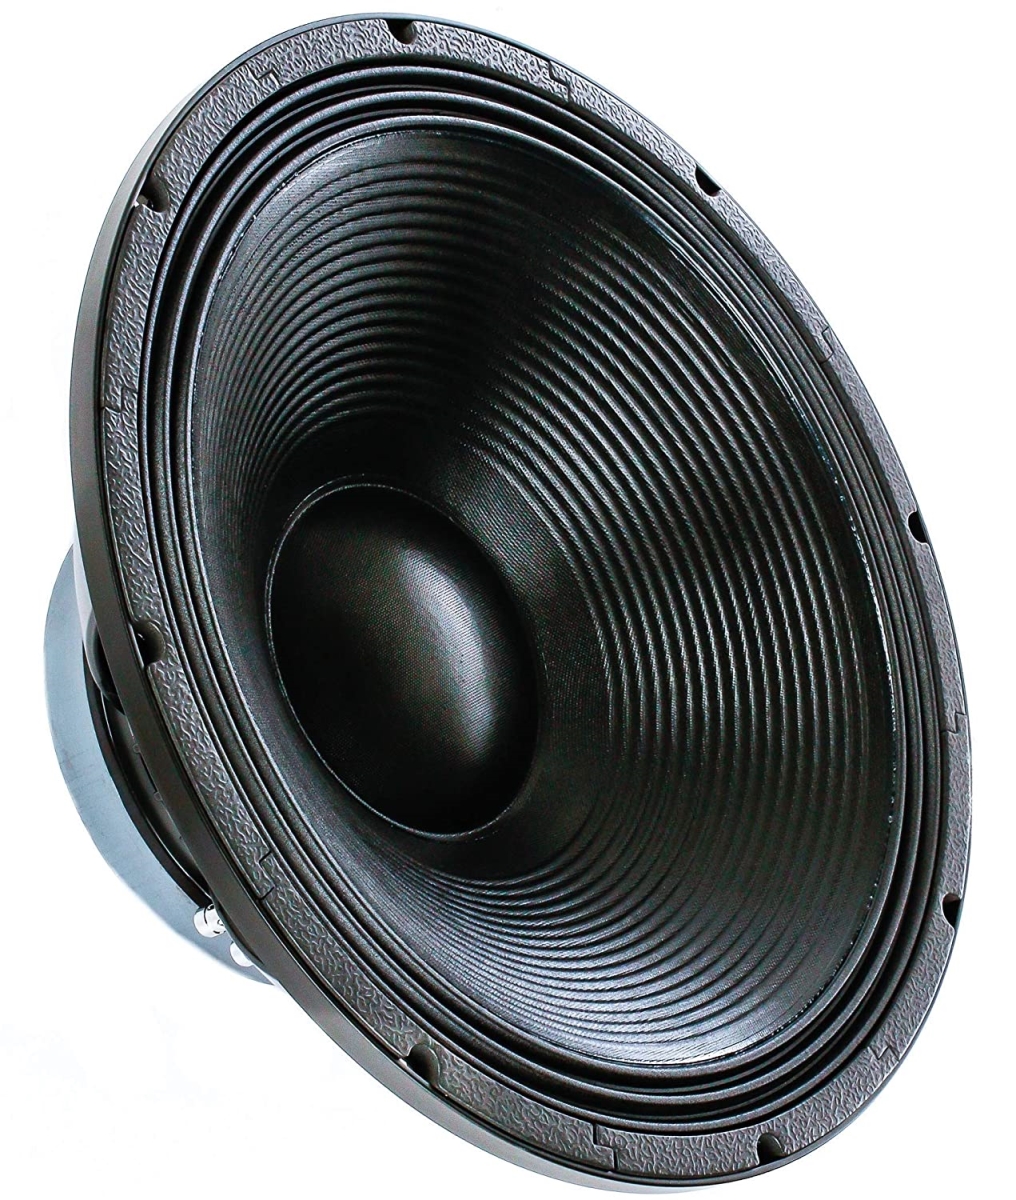 Picture of B&C Speakers 15DS100-4 3000 W 4 Ohm 18 Woofer Speaker